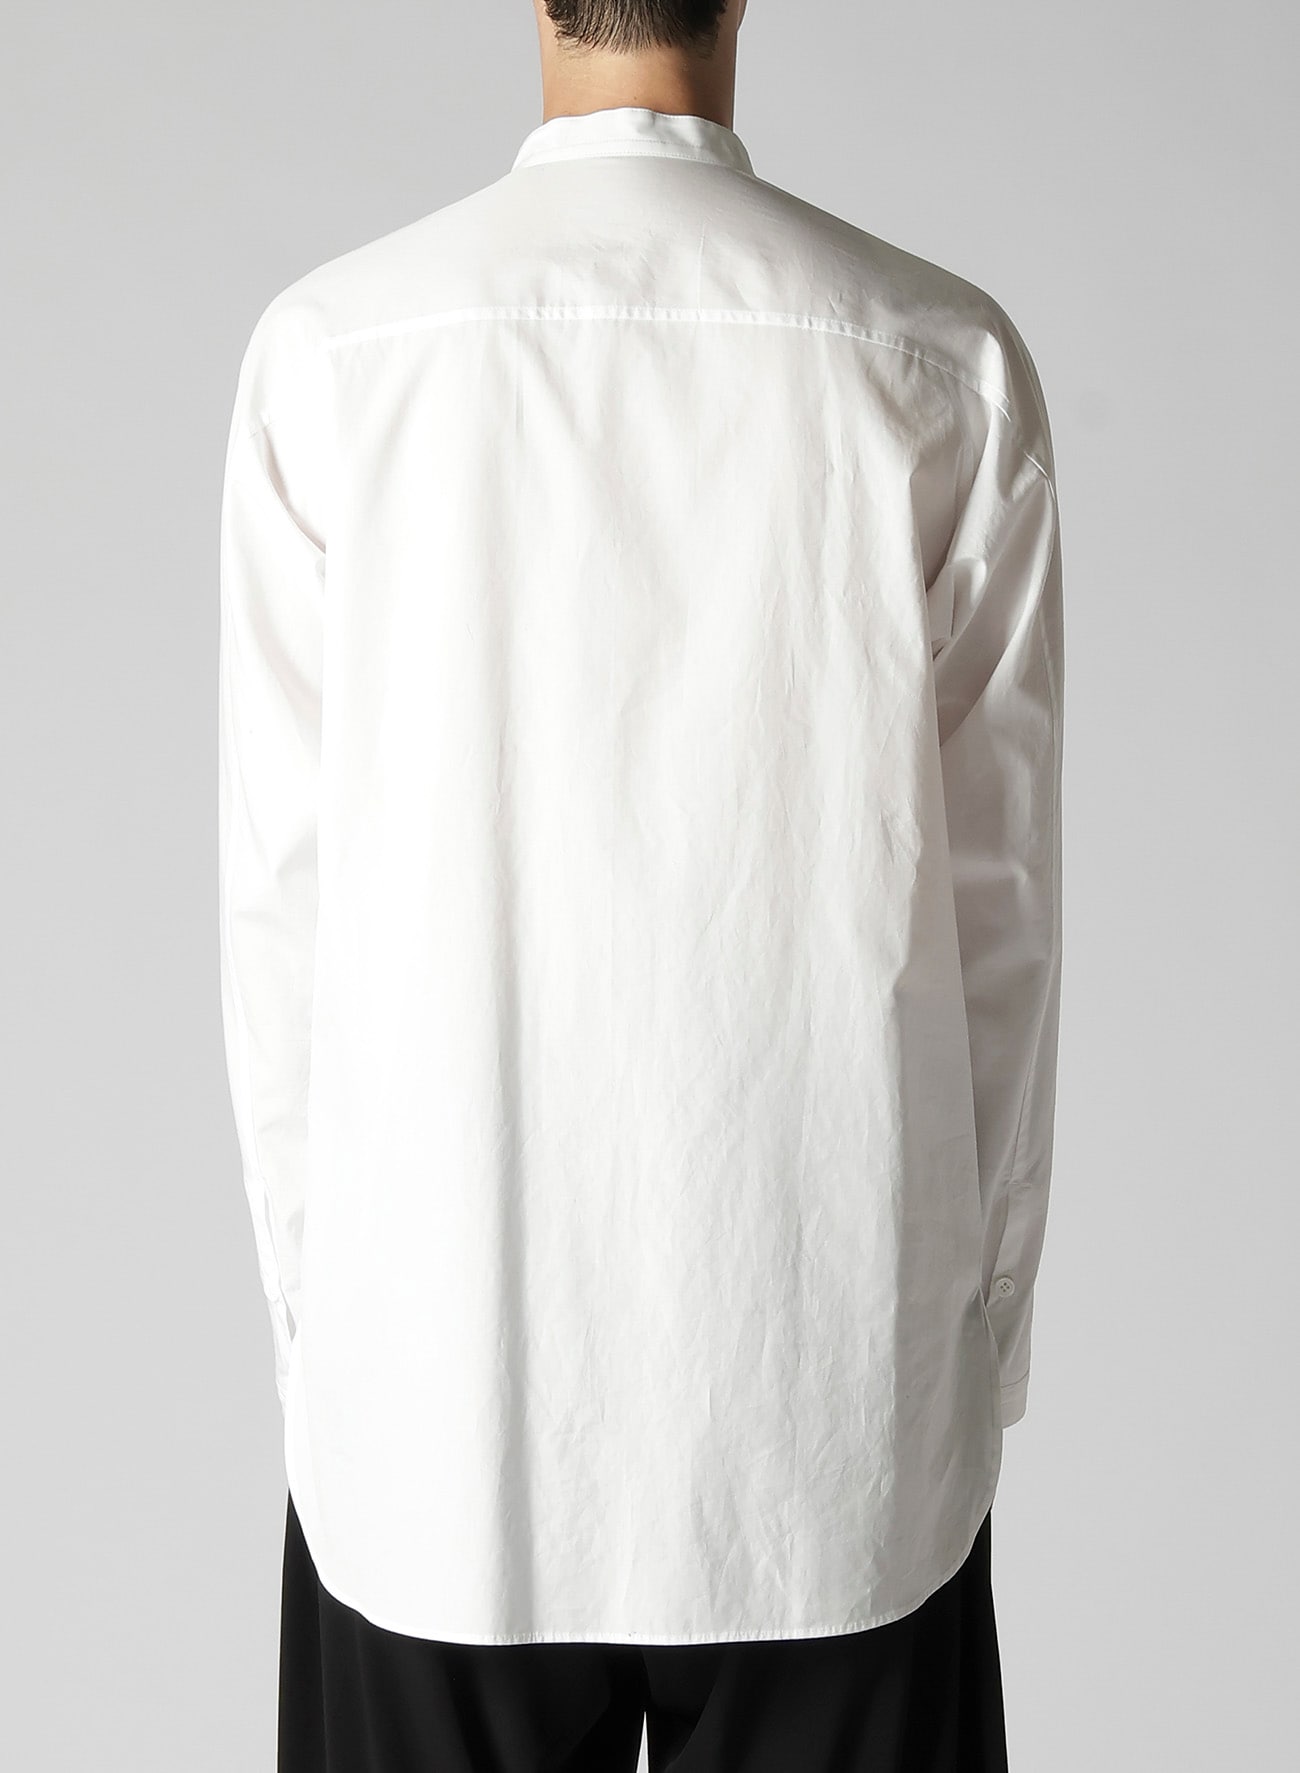 100/2 BROAD J-UNEVEN STAND B-A(S White): Yohji Yamamoto POUR HOMME 